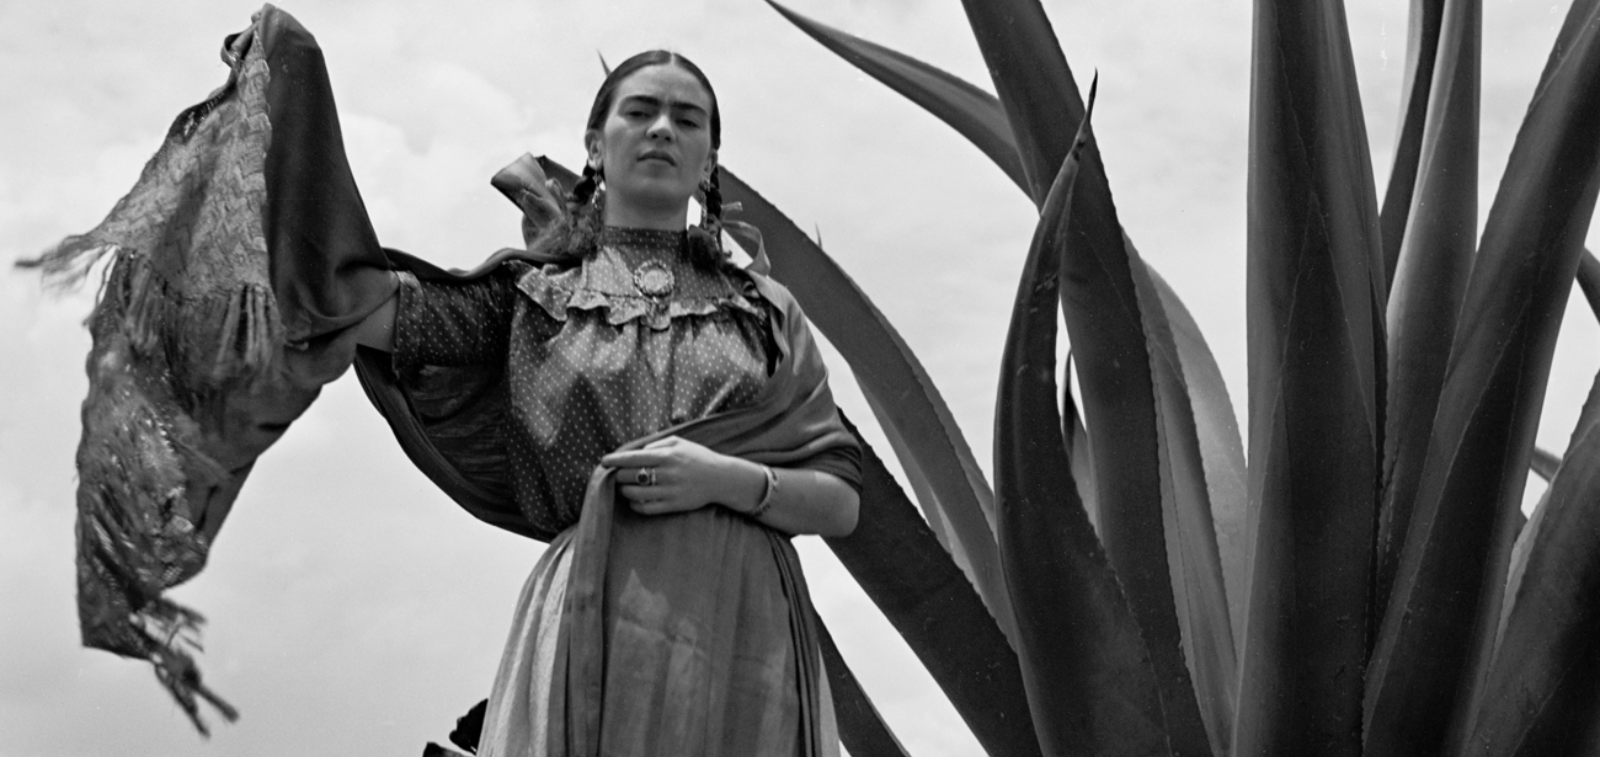 Frida Kahlo standing next to an agave plant, by Toni Frissel